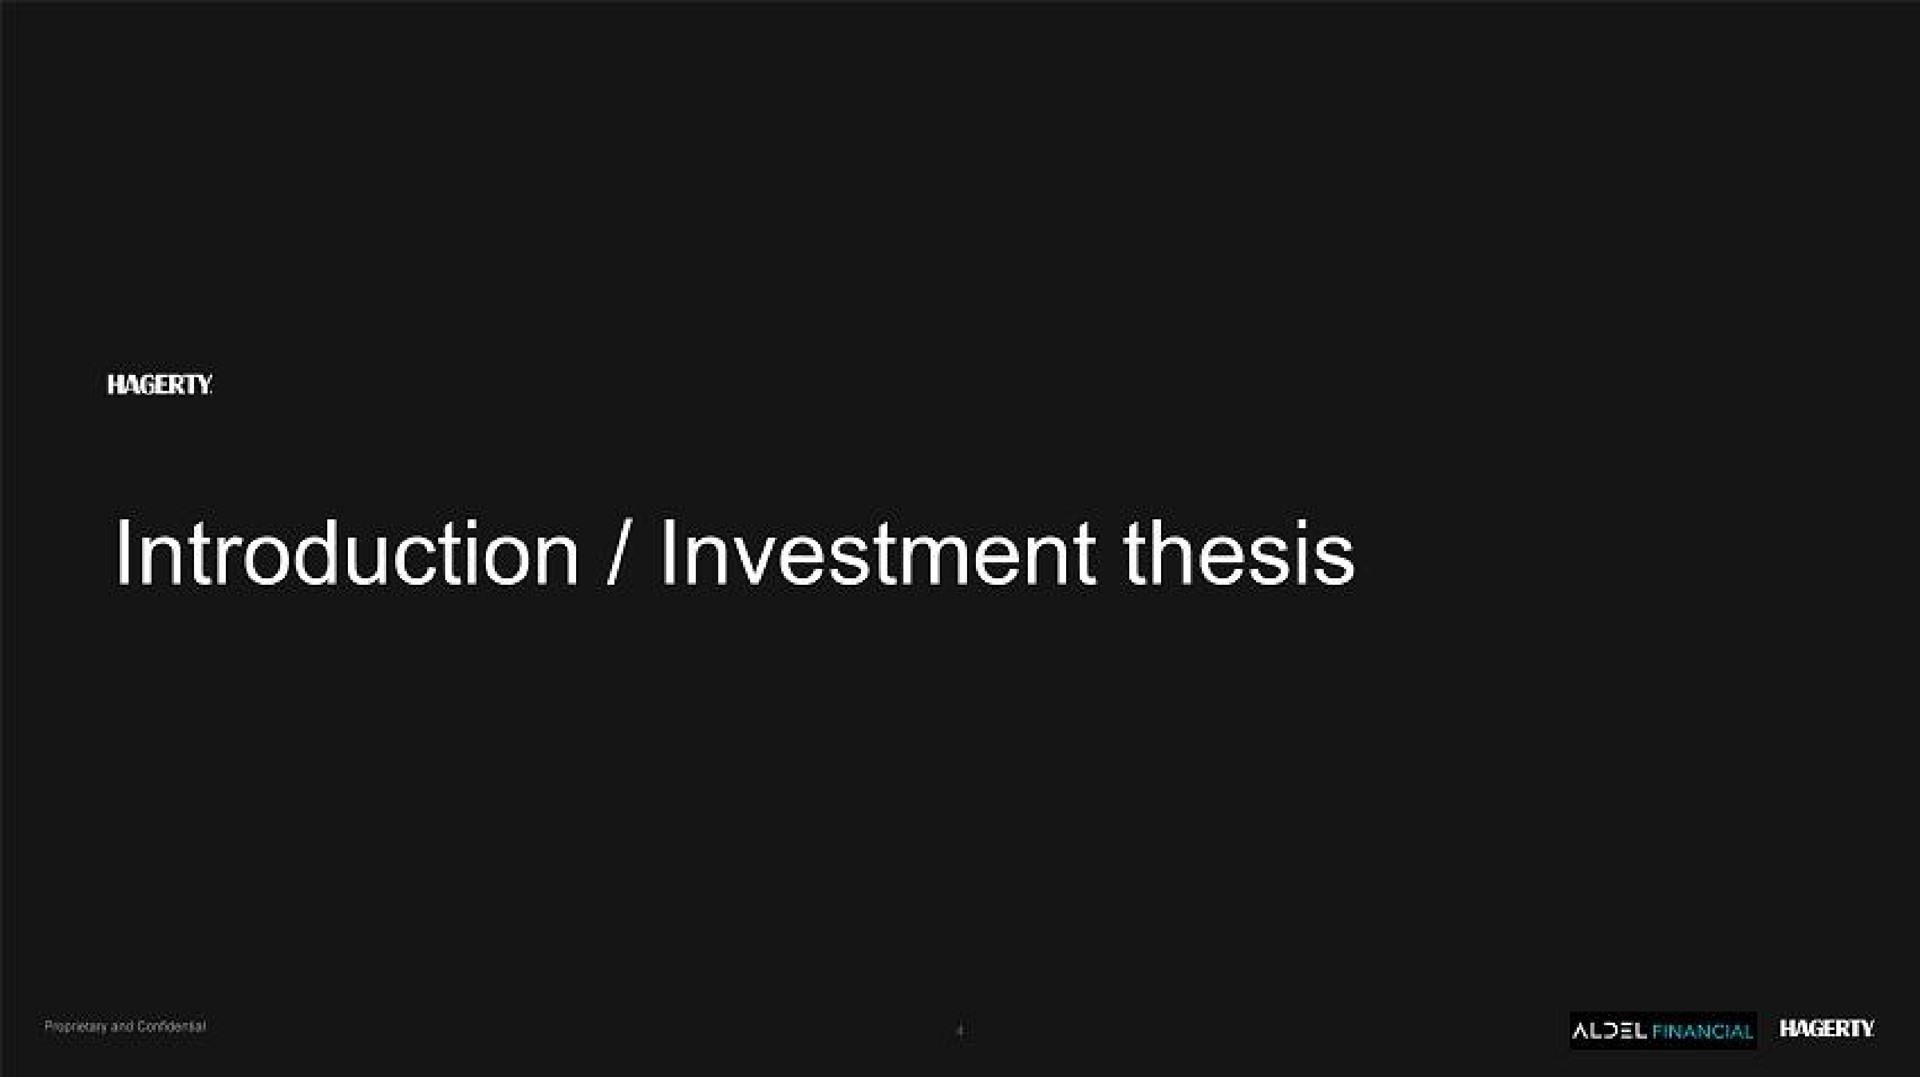 introduction investment thesis | Hagerty